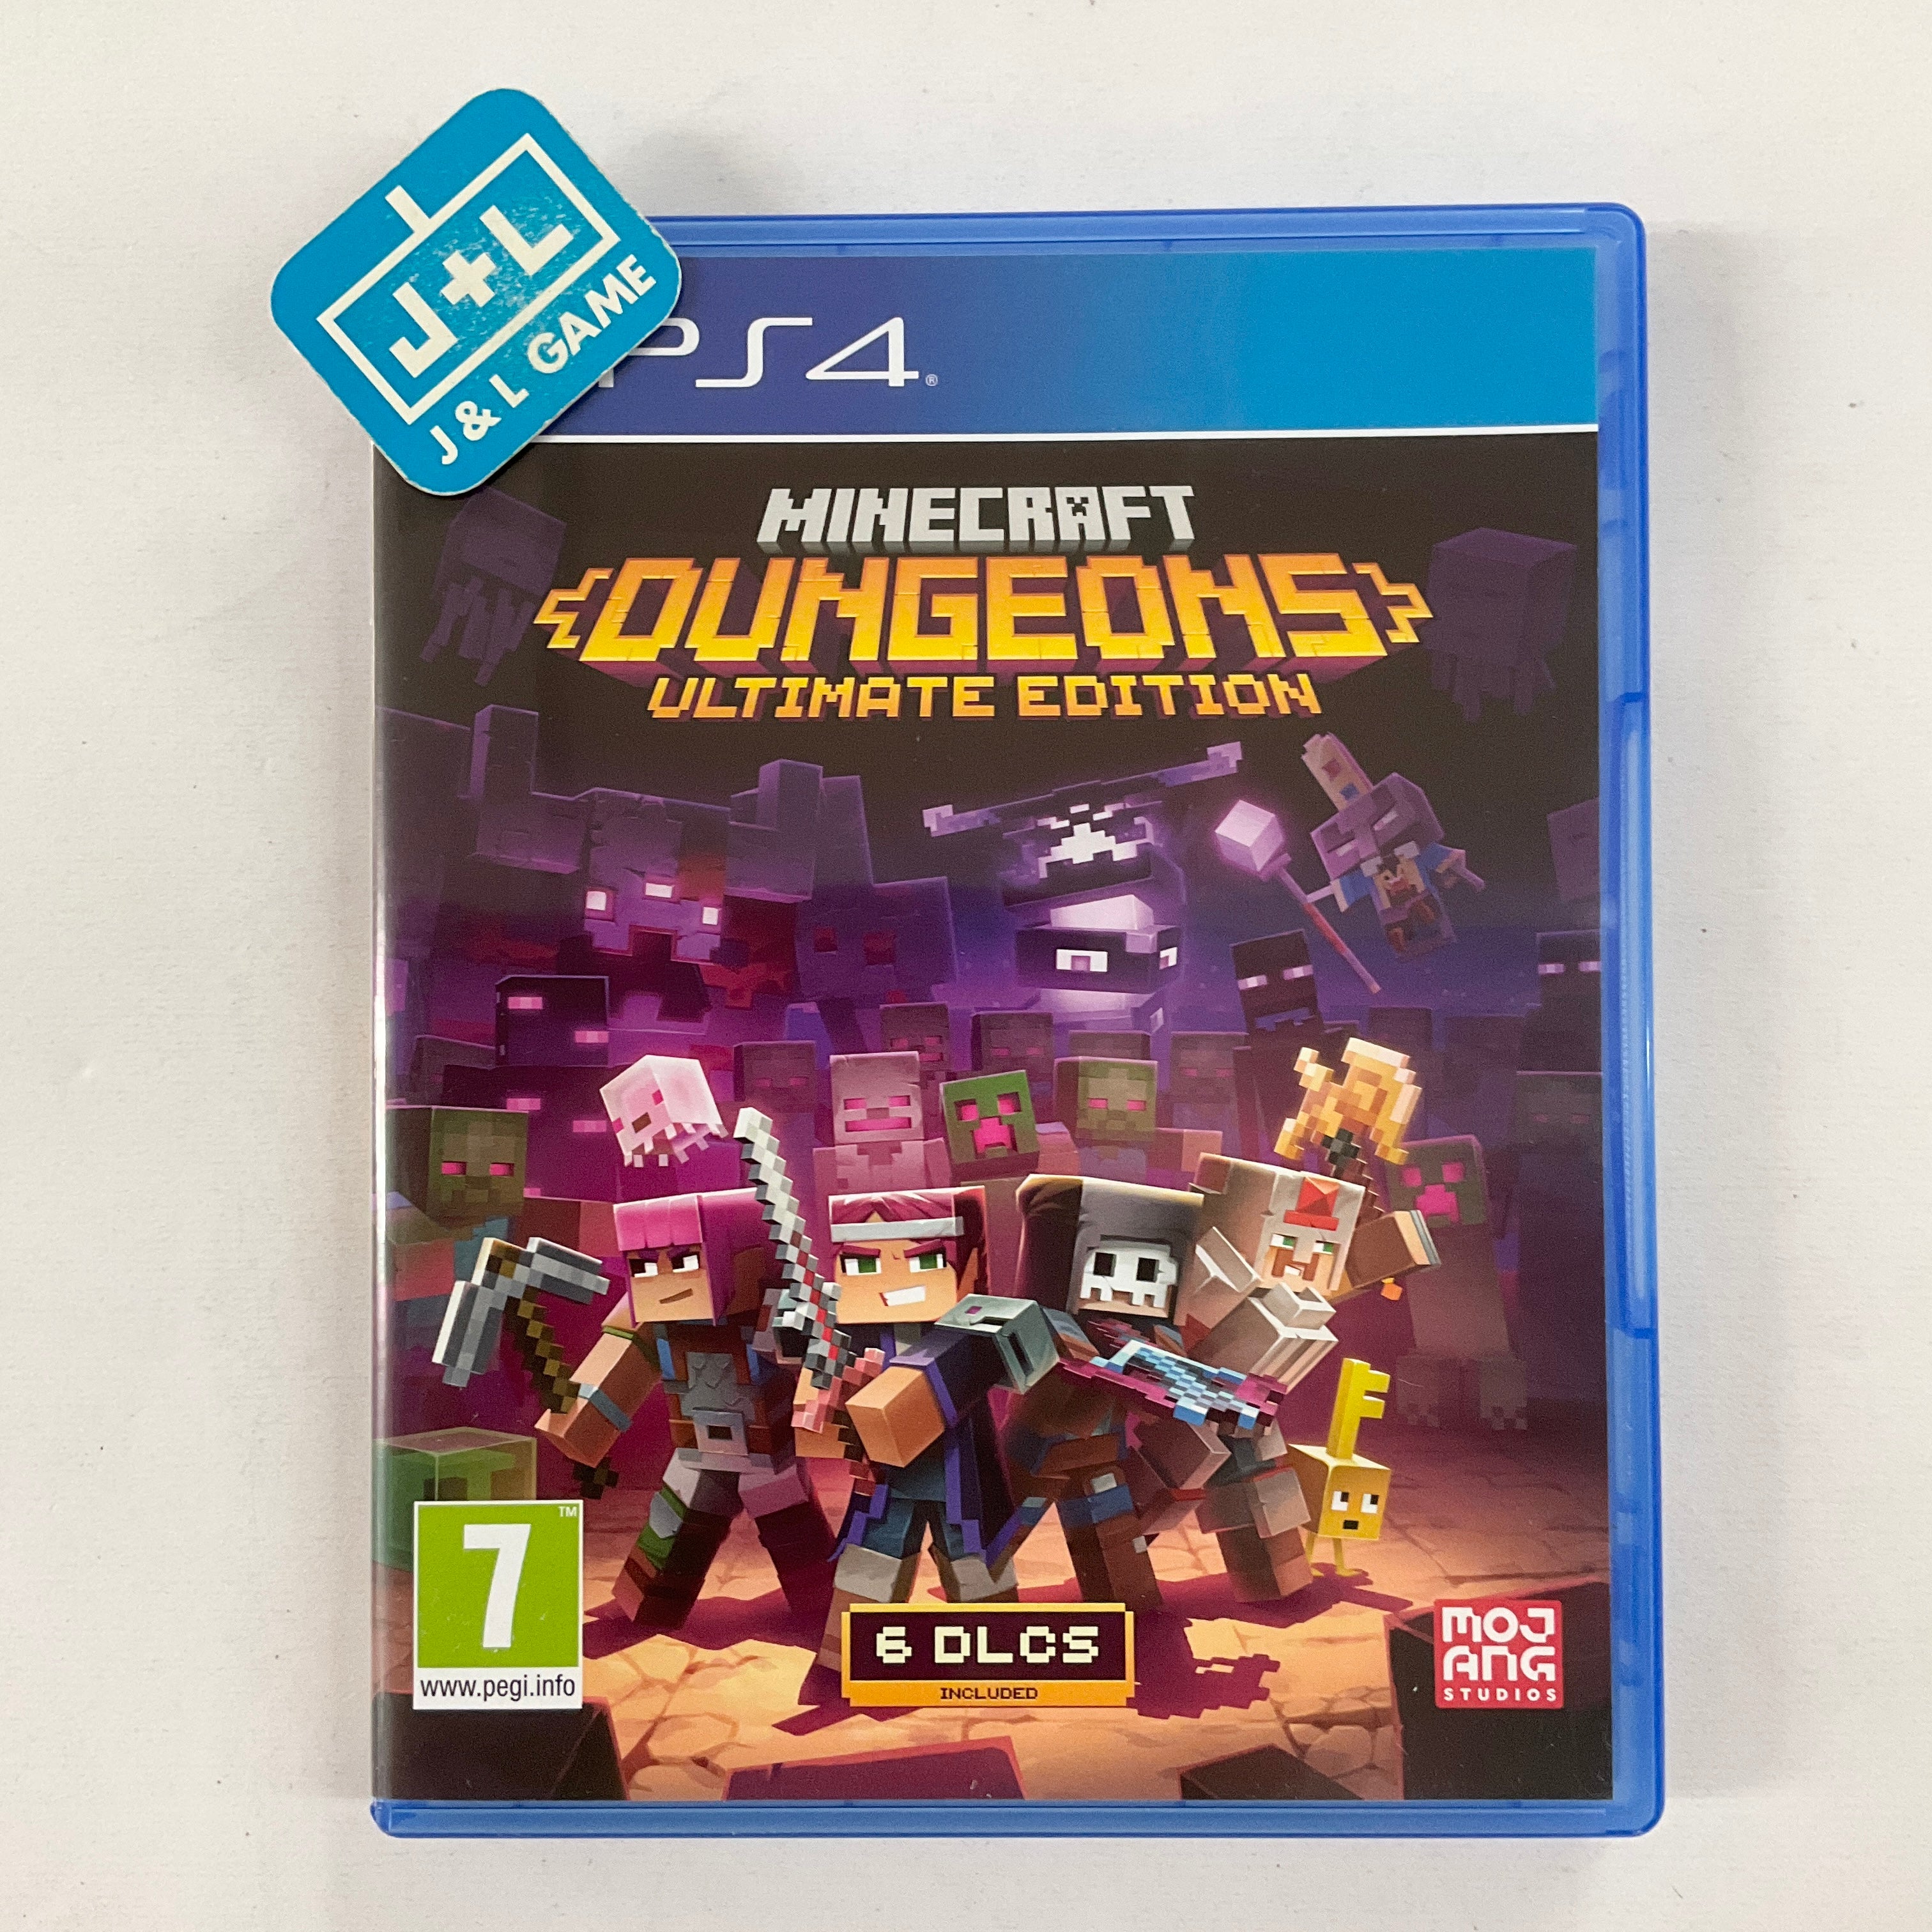 Minecraft Dungeons (Ultimate Edition) - (PS4) PlayStation 4 [Pre-Owned] (European Import) Video Games Mojang AB   